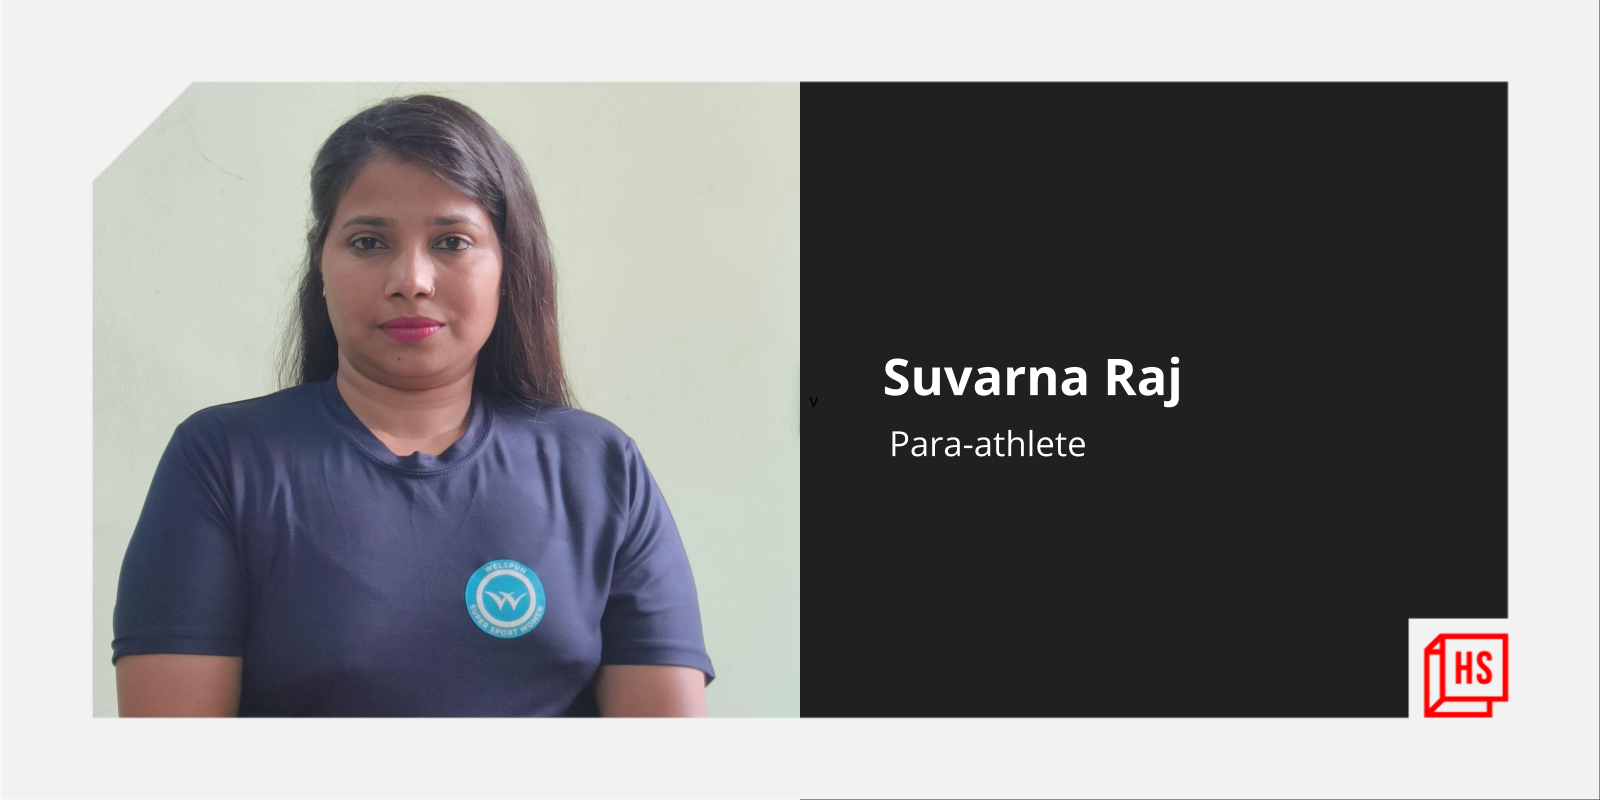 Meet para-athlete Suvarna Raj who is fighting for the rights of differently-abled
